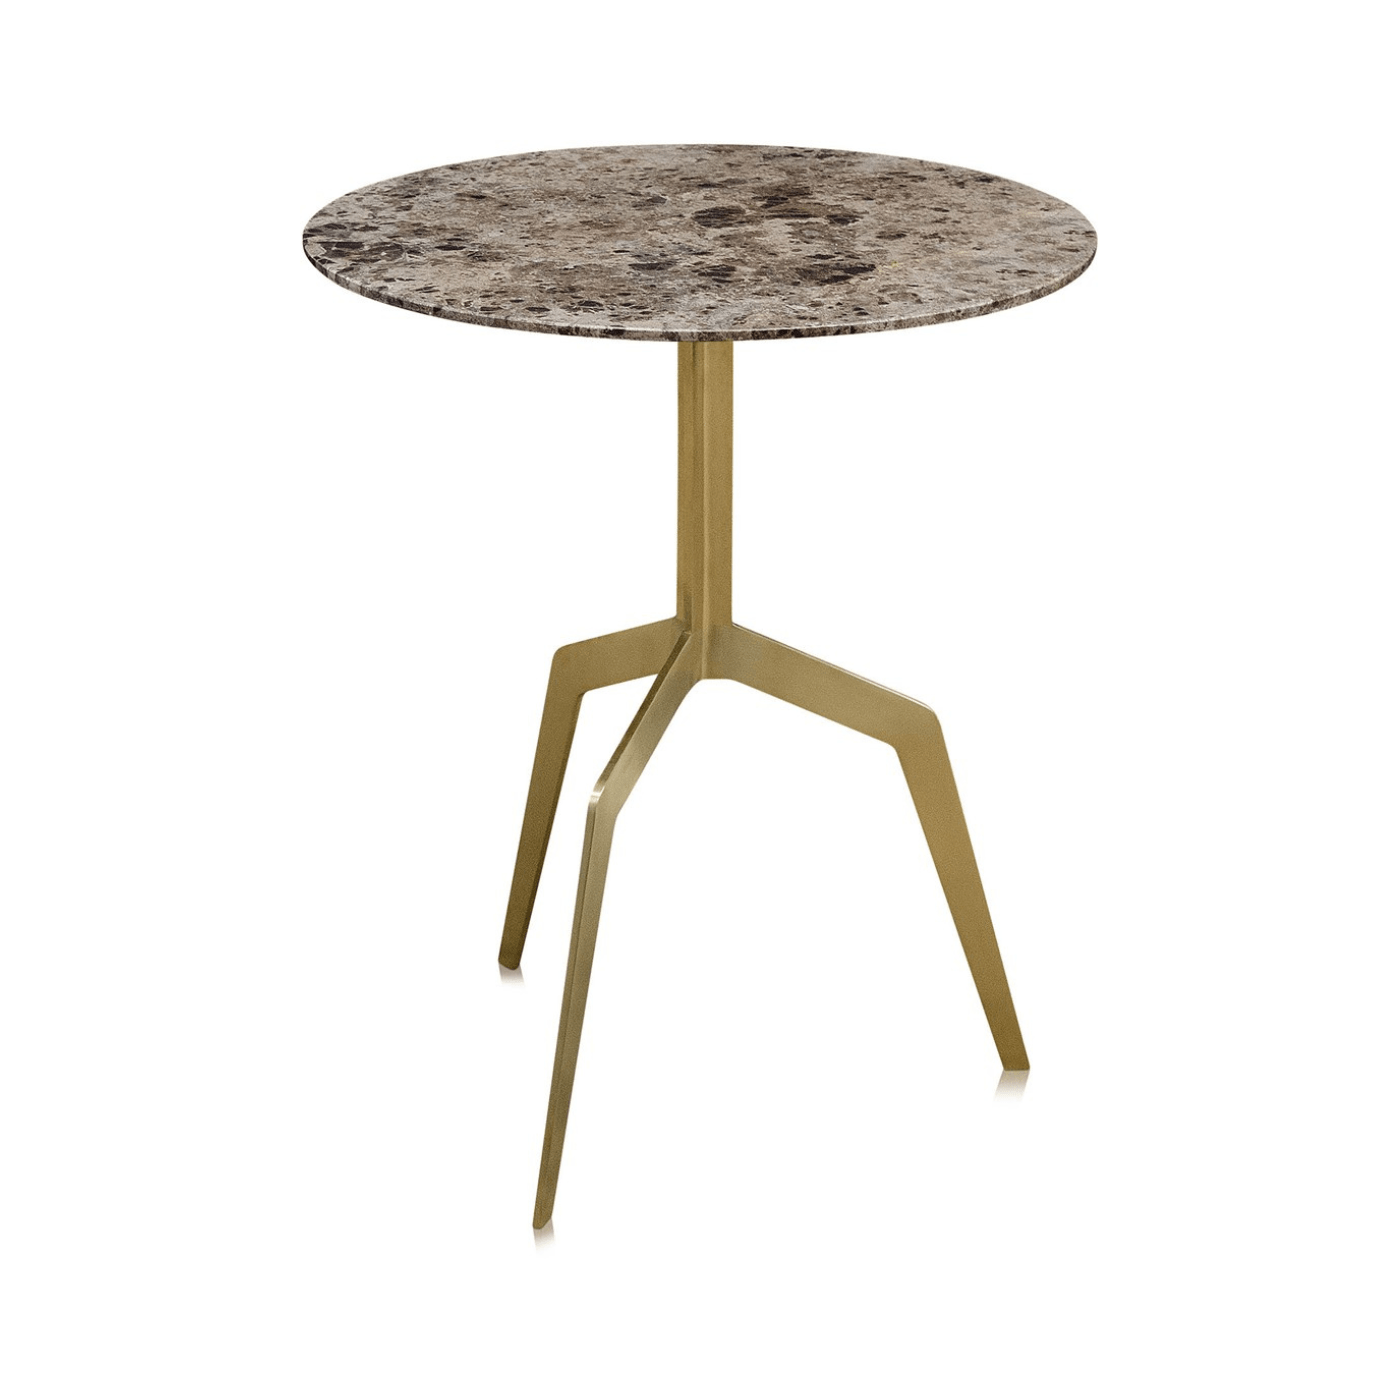 Razor Marble Top Circular Occasional Table with Gold Base D50cm - Maison Rêves UK